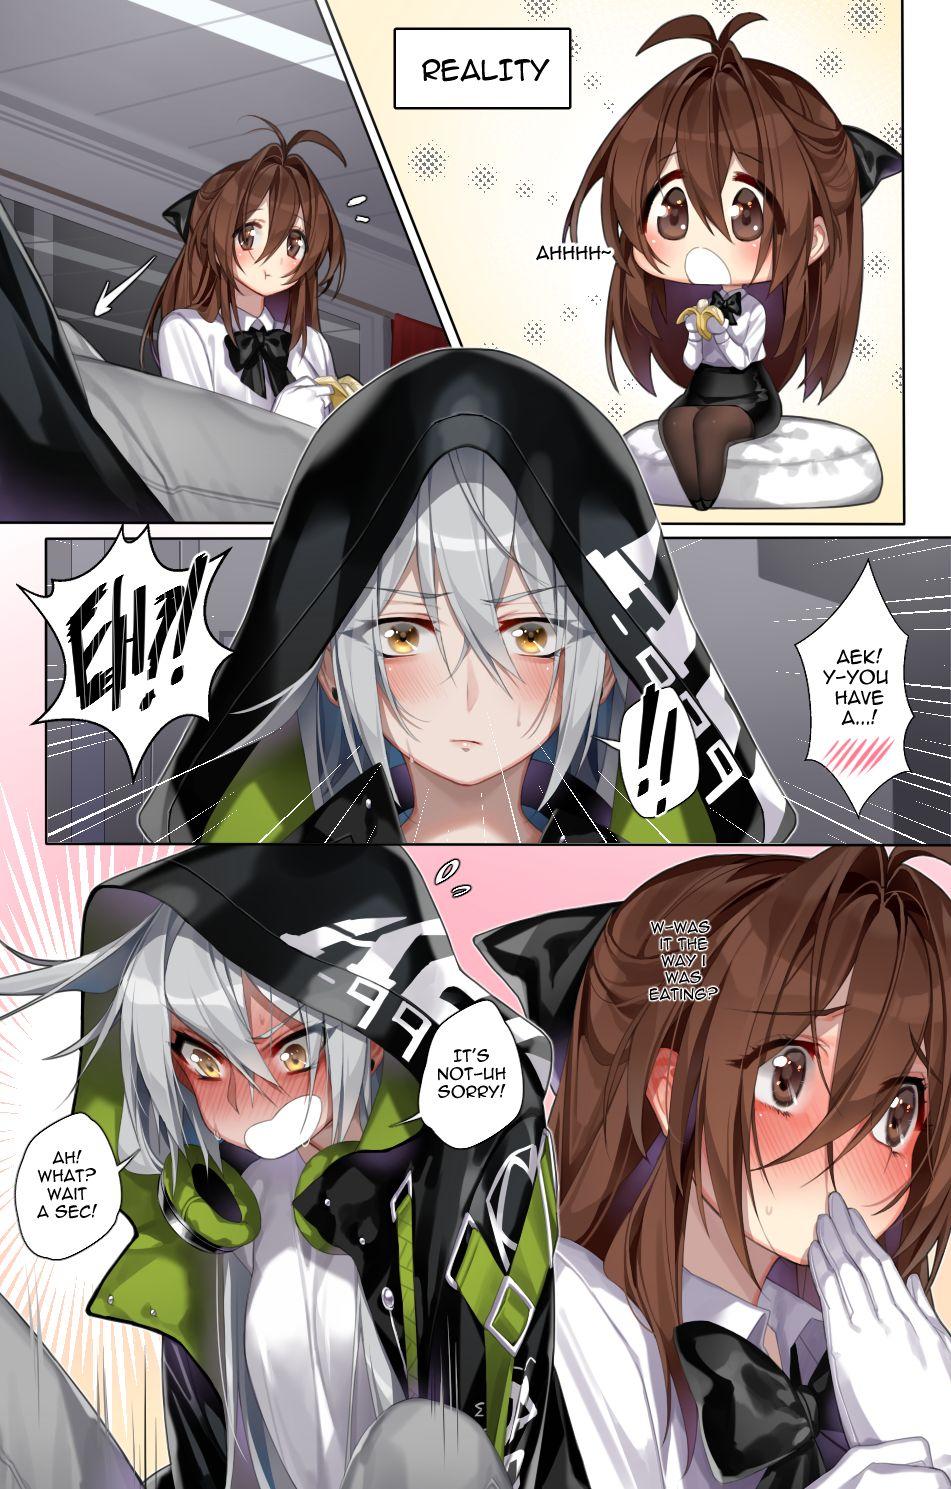 Group Sex AEK-999 and banana - Girls frontline Special Locations - Page 3